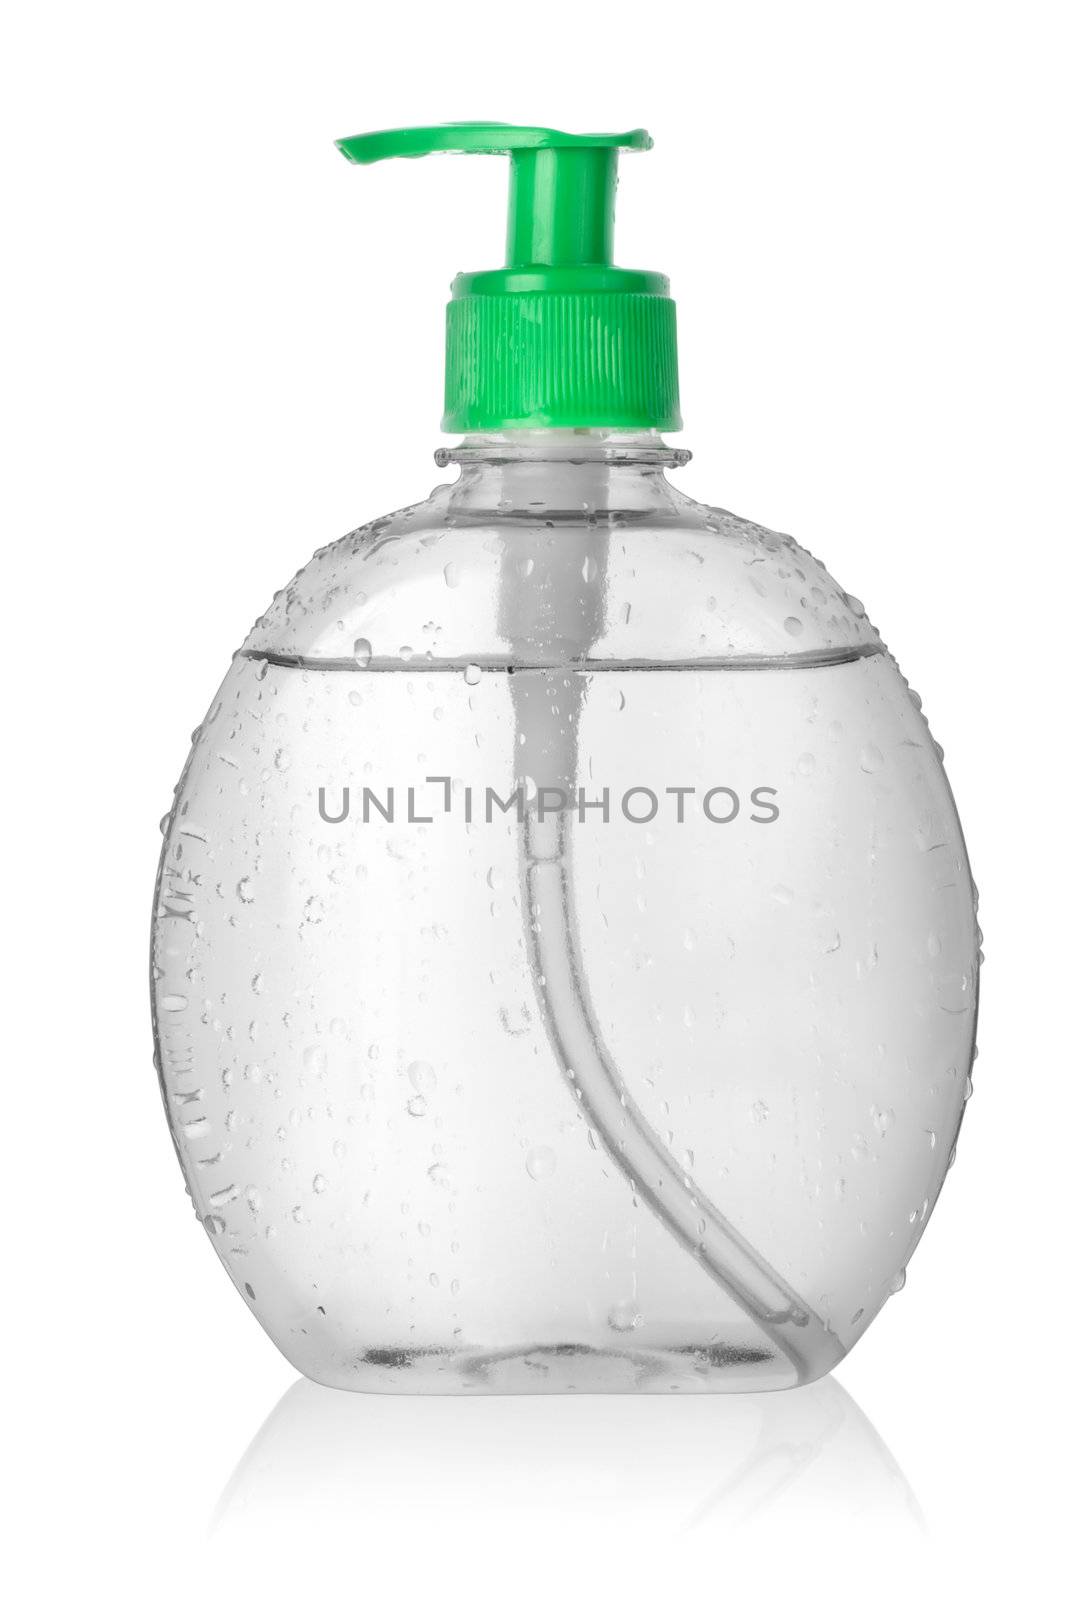 Spray bottle of water isolated on a white background. Clipping path